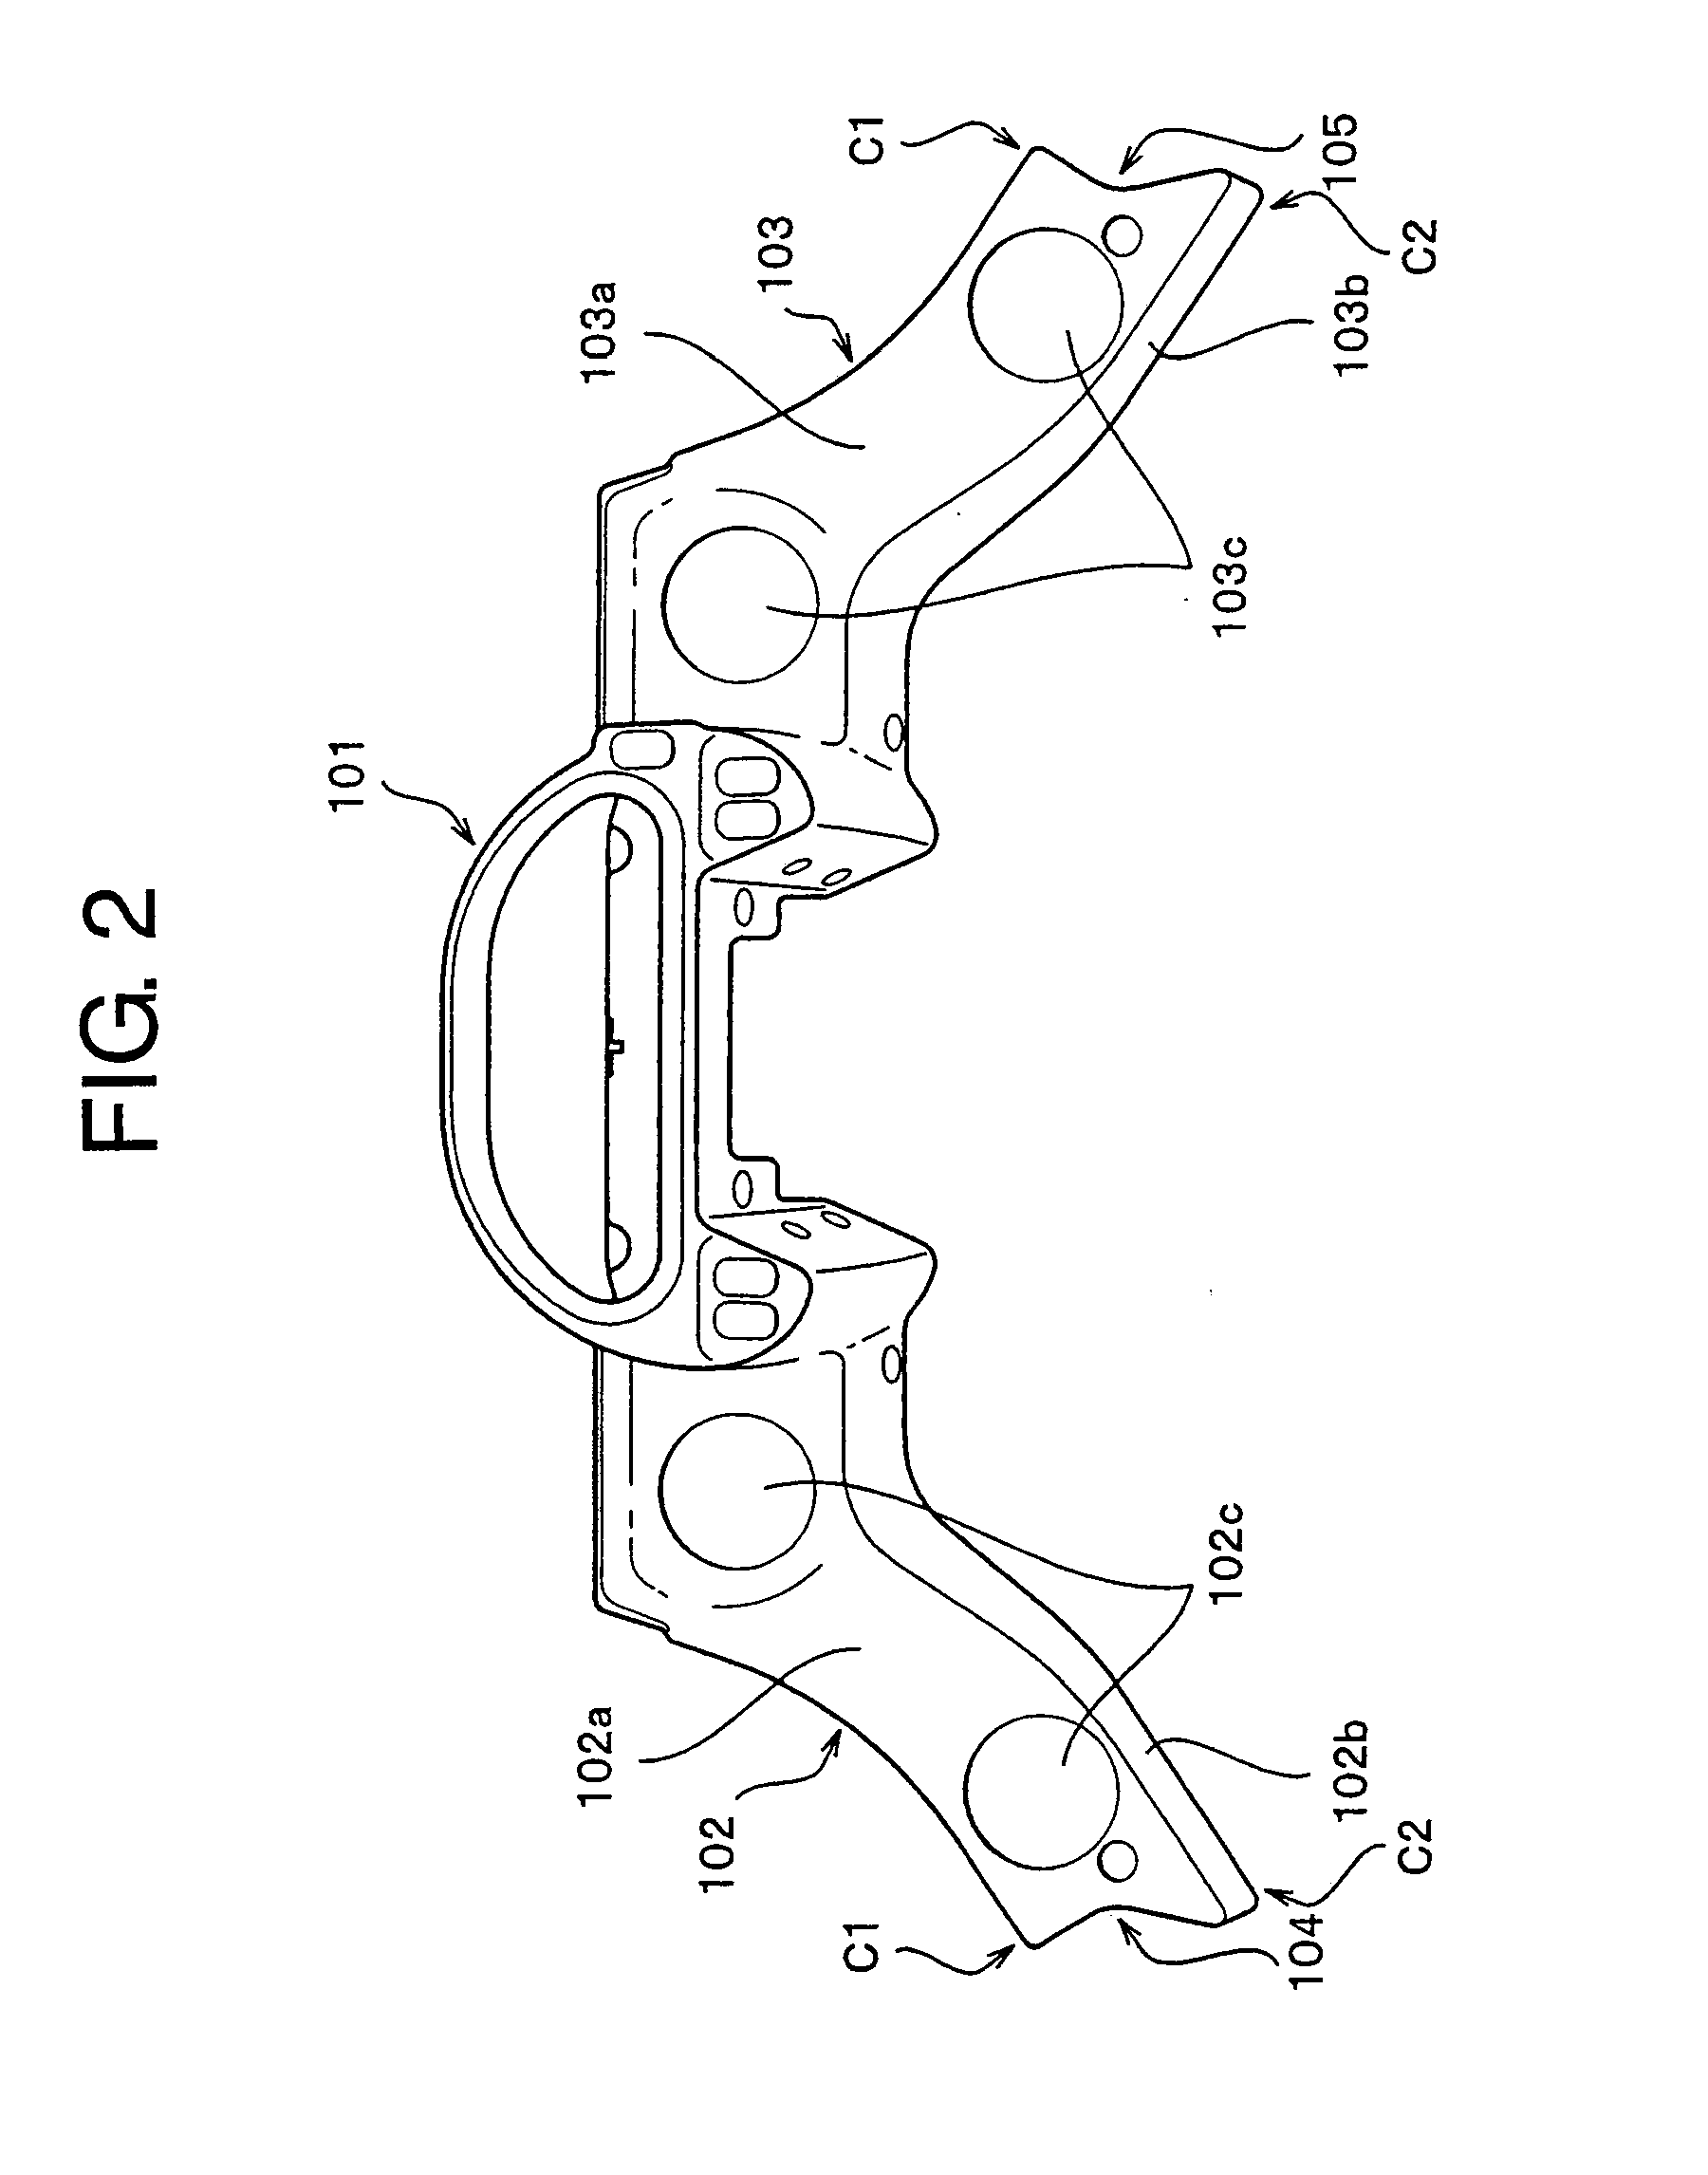 Interior Trim Member of Work Vehicle and Method of Manufacturing the Same